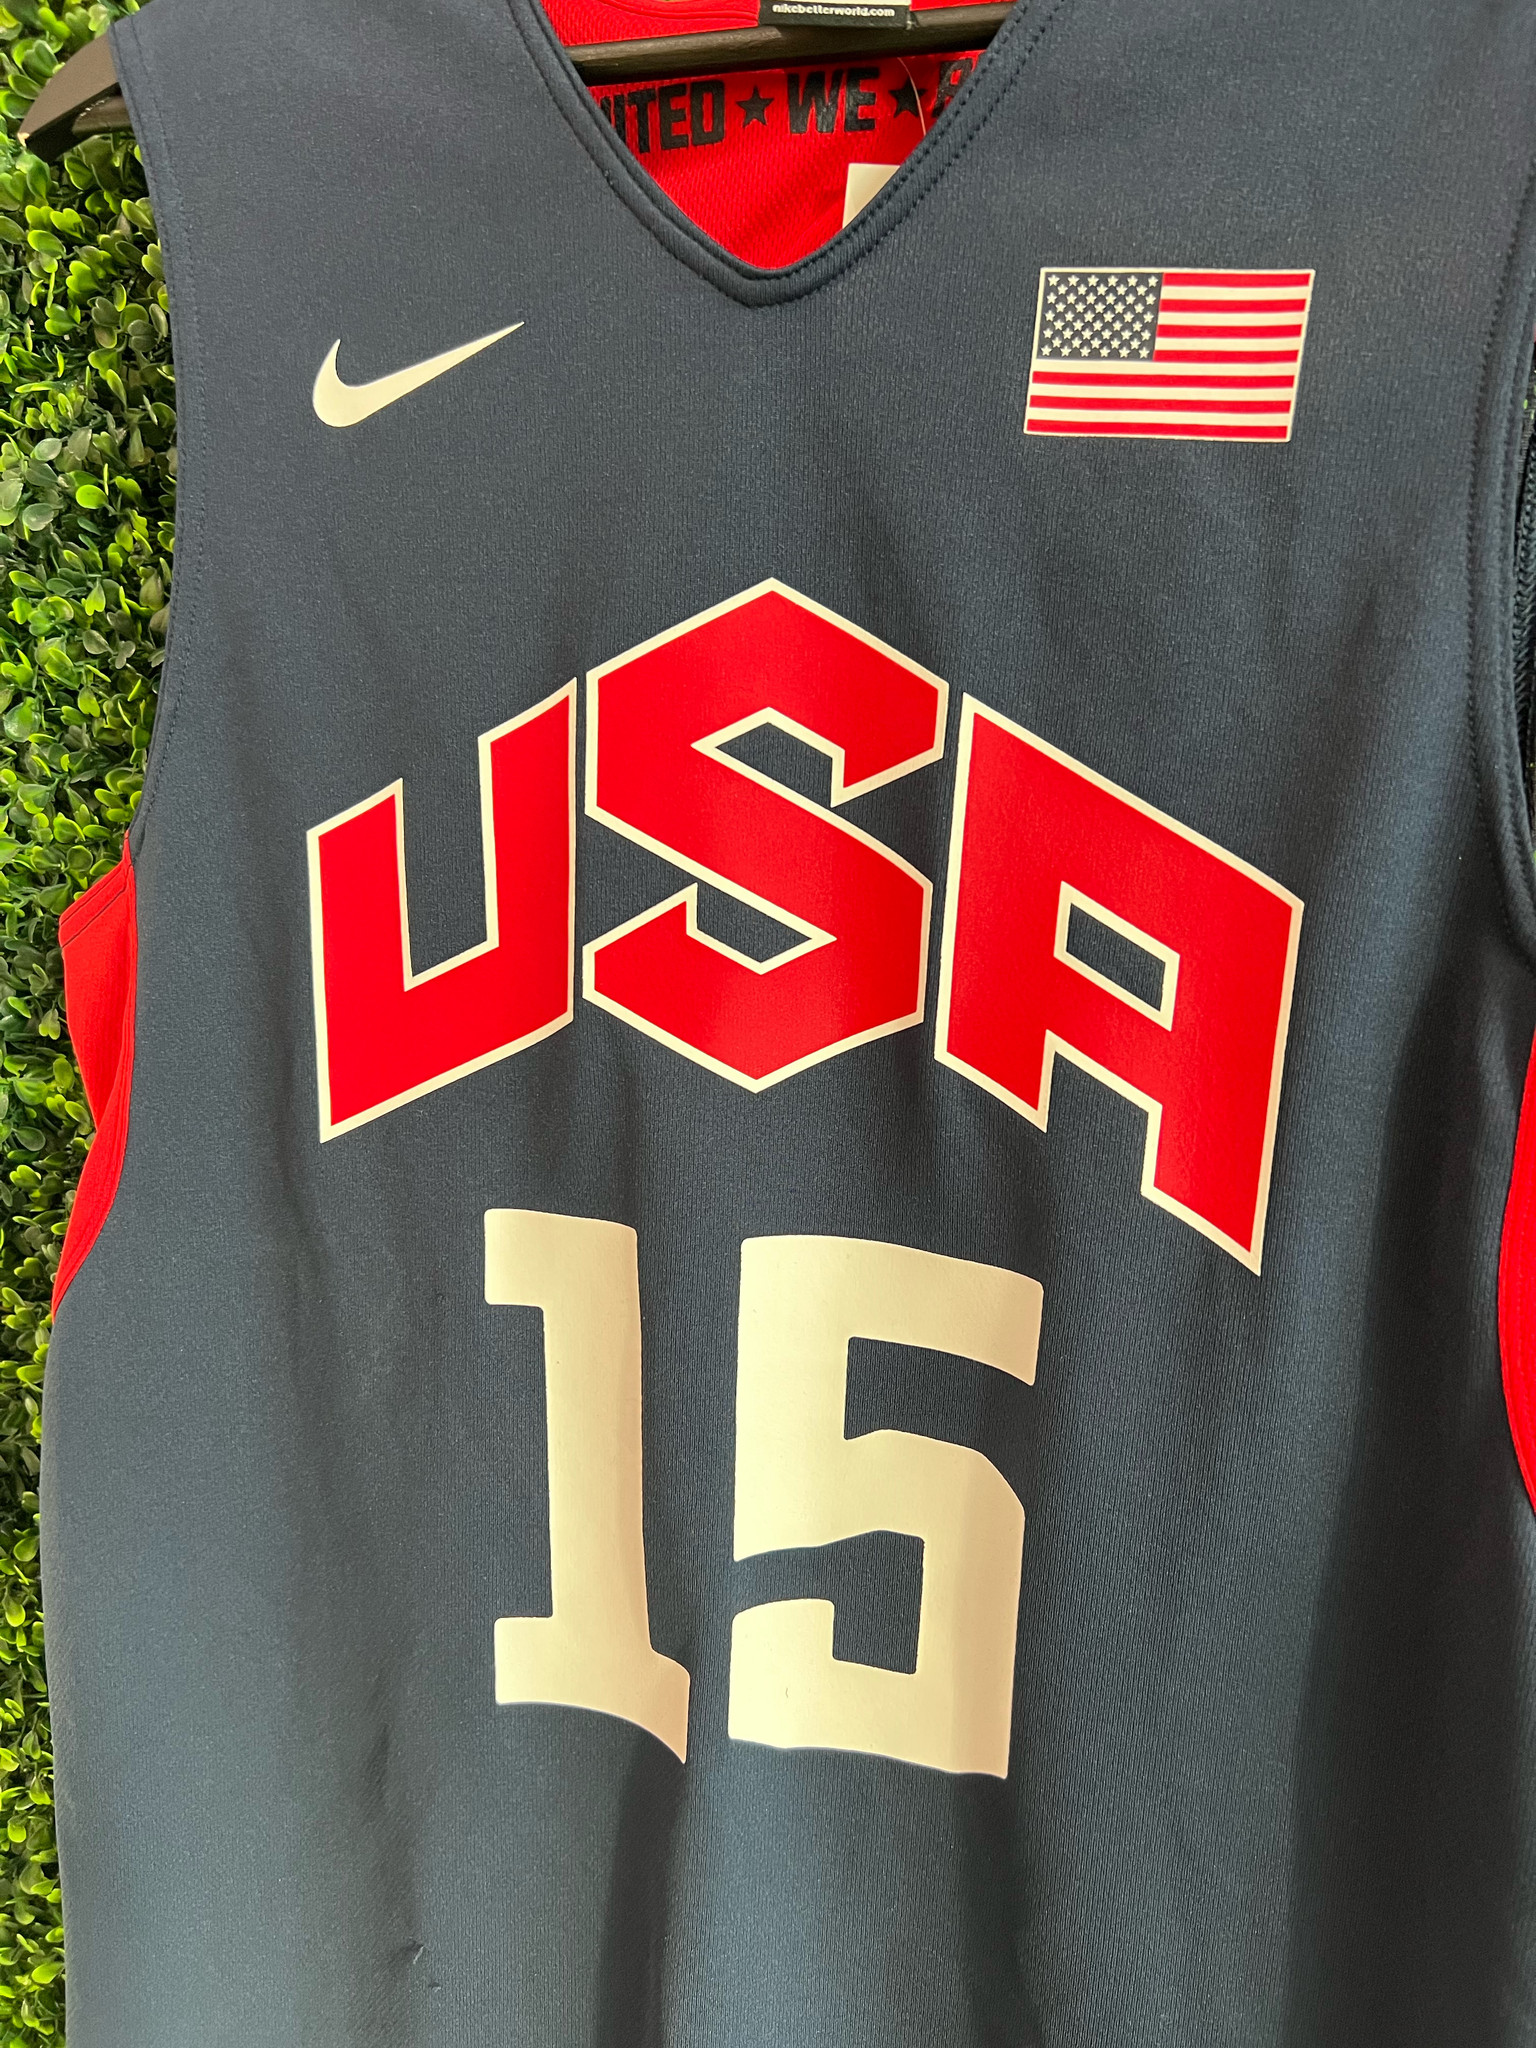 Carmelo Anthony Team USA Olympics Jersey – Jerseys and Sneakers